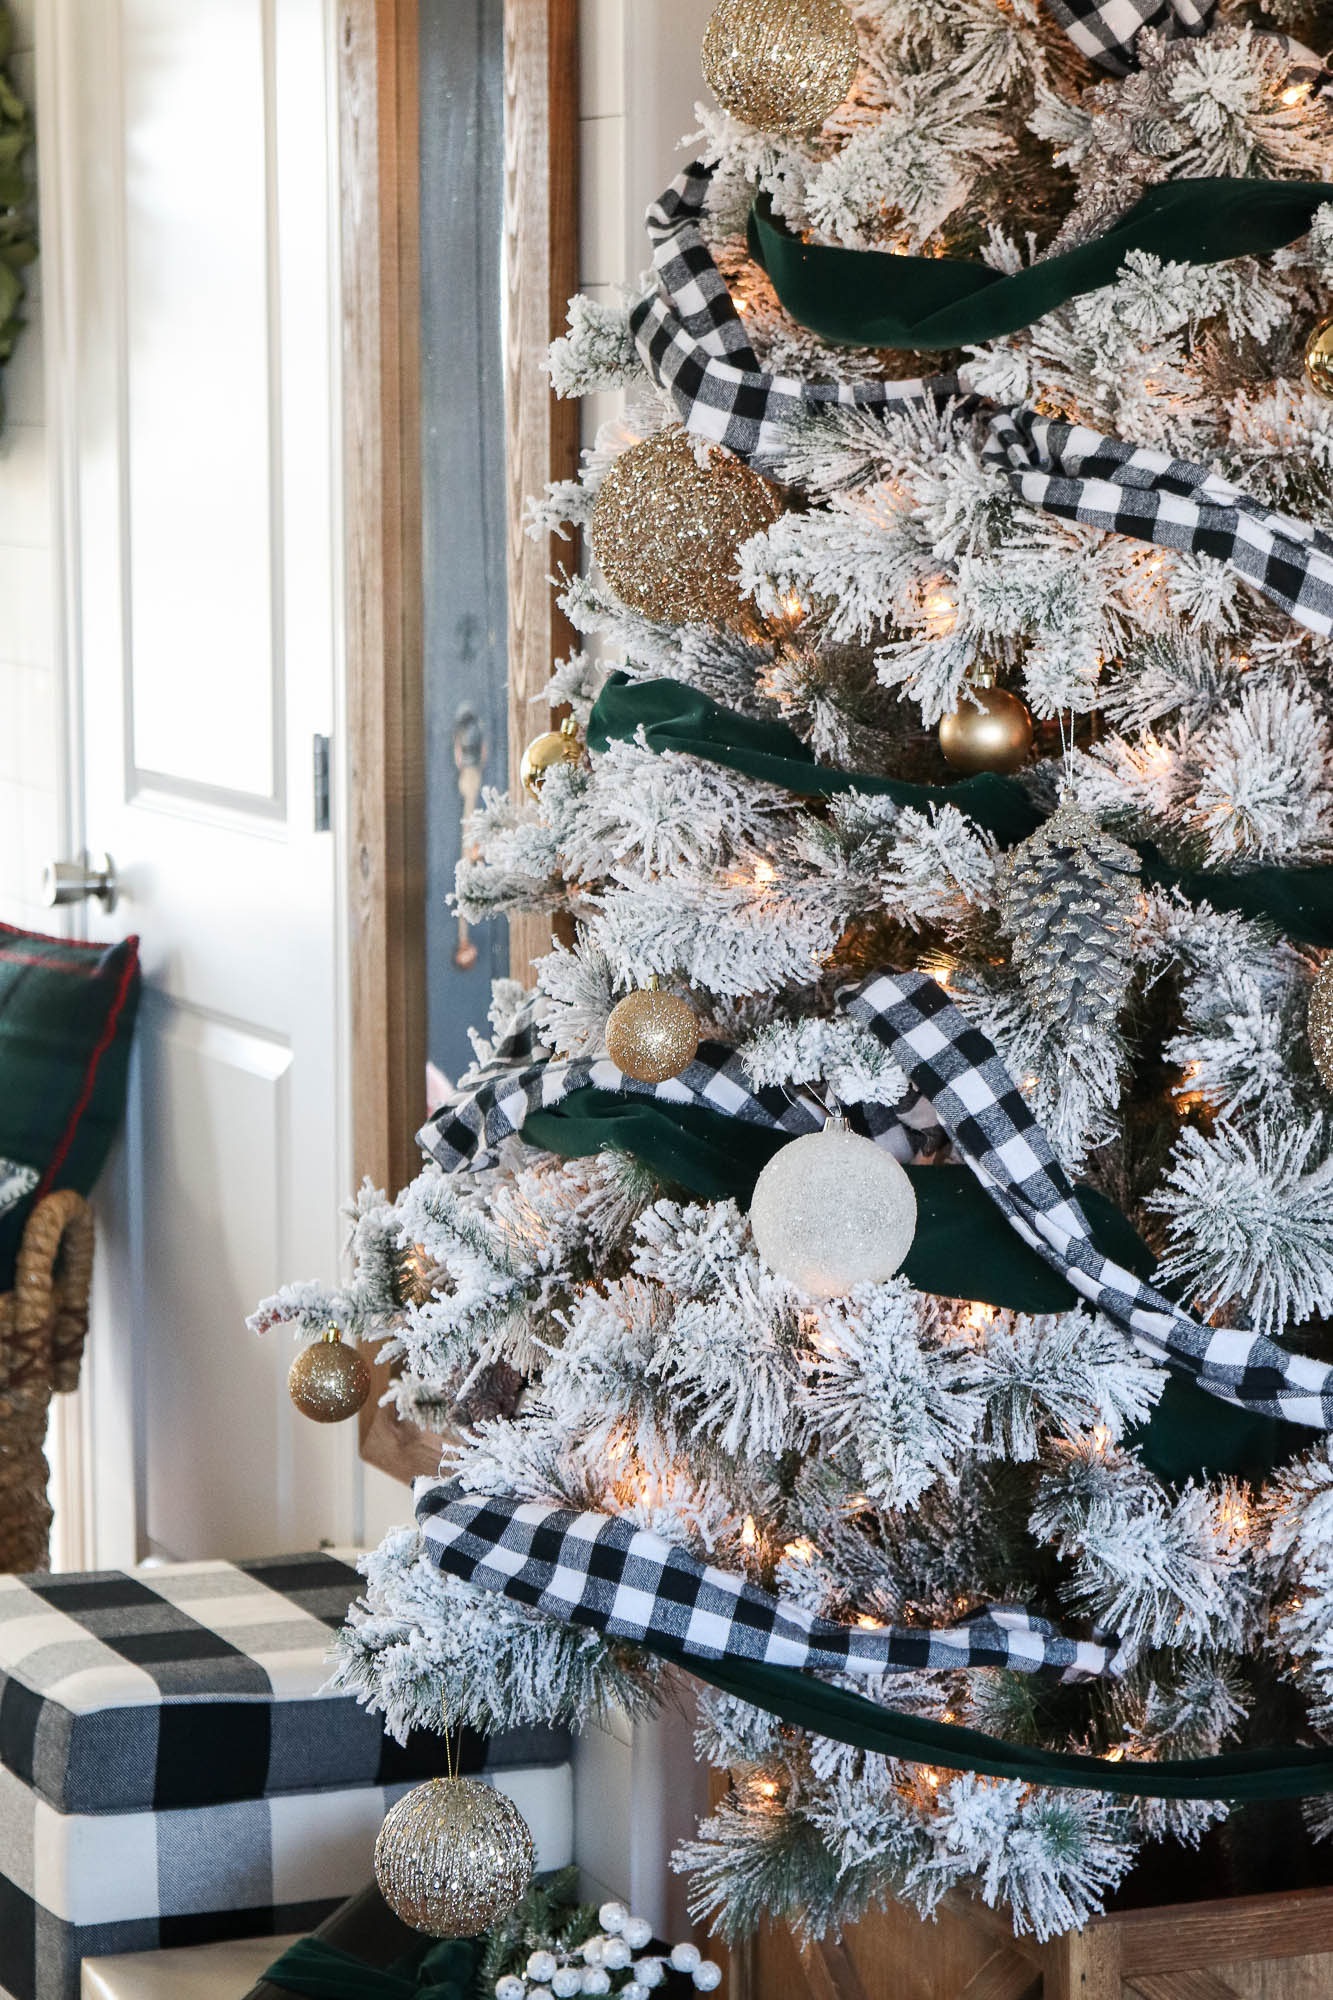 The Best Flocked Christmas Trees by The Wood Grain Cottage - The Wood ...